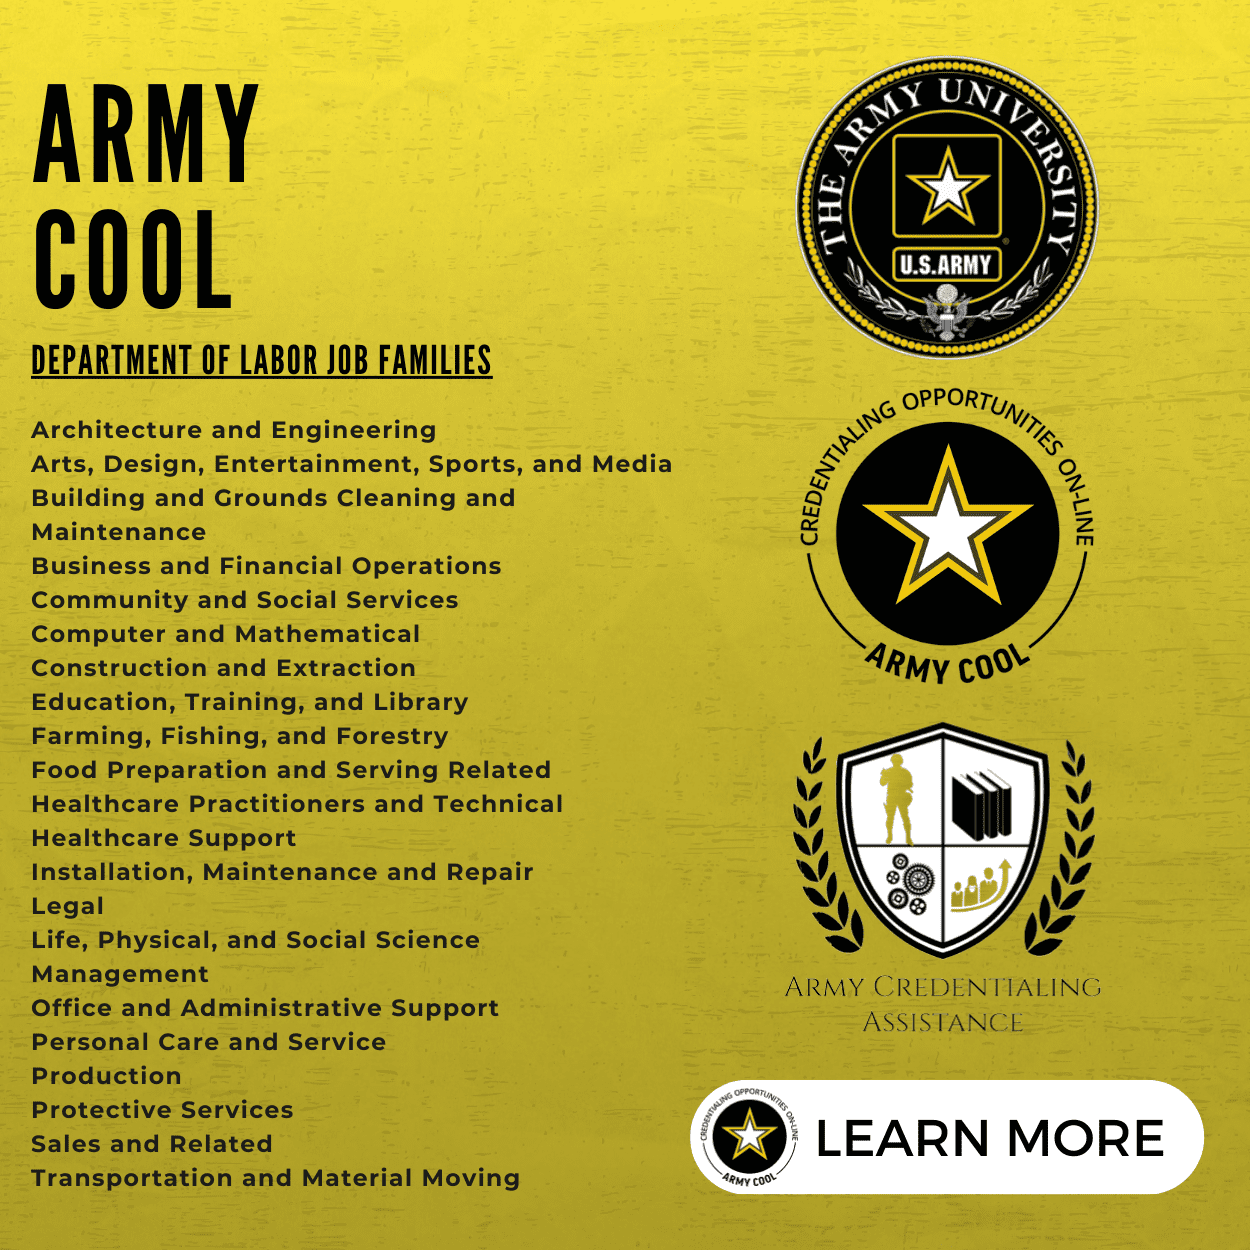 ARMY-COOL - 1 